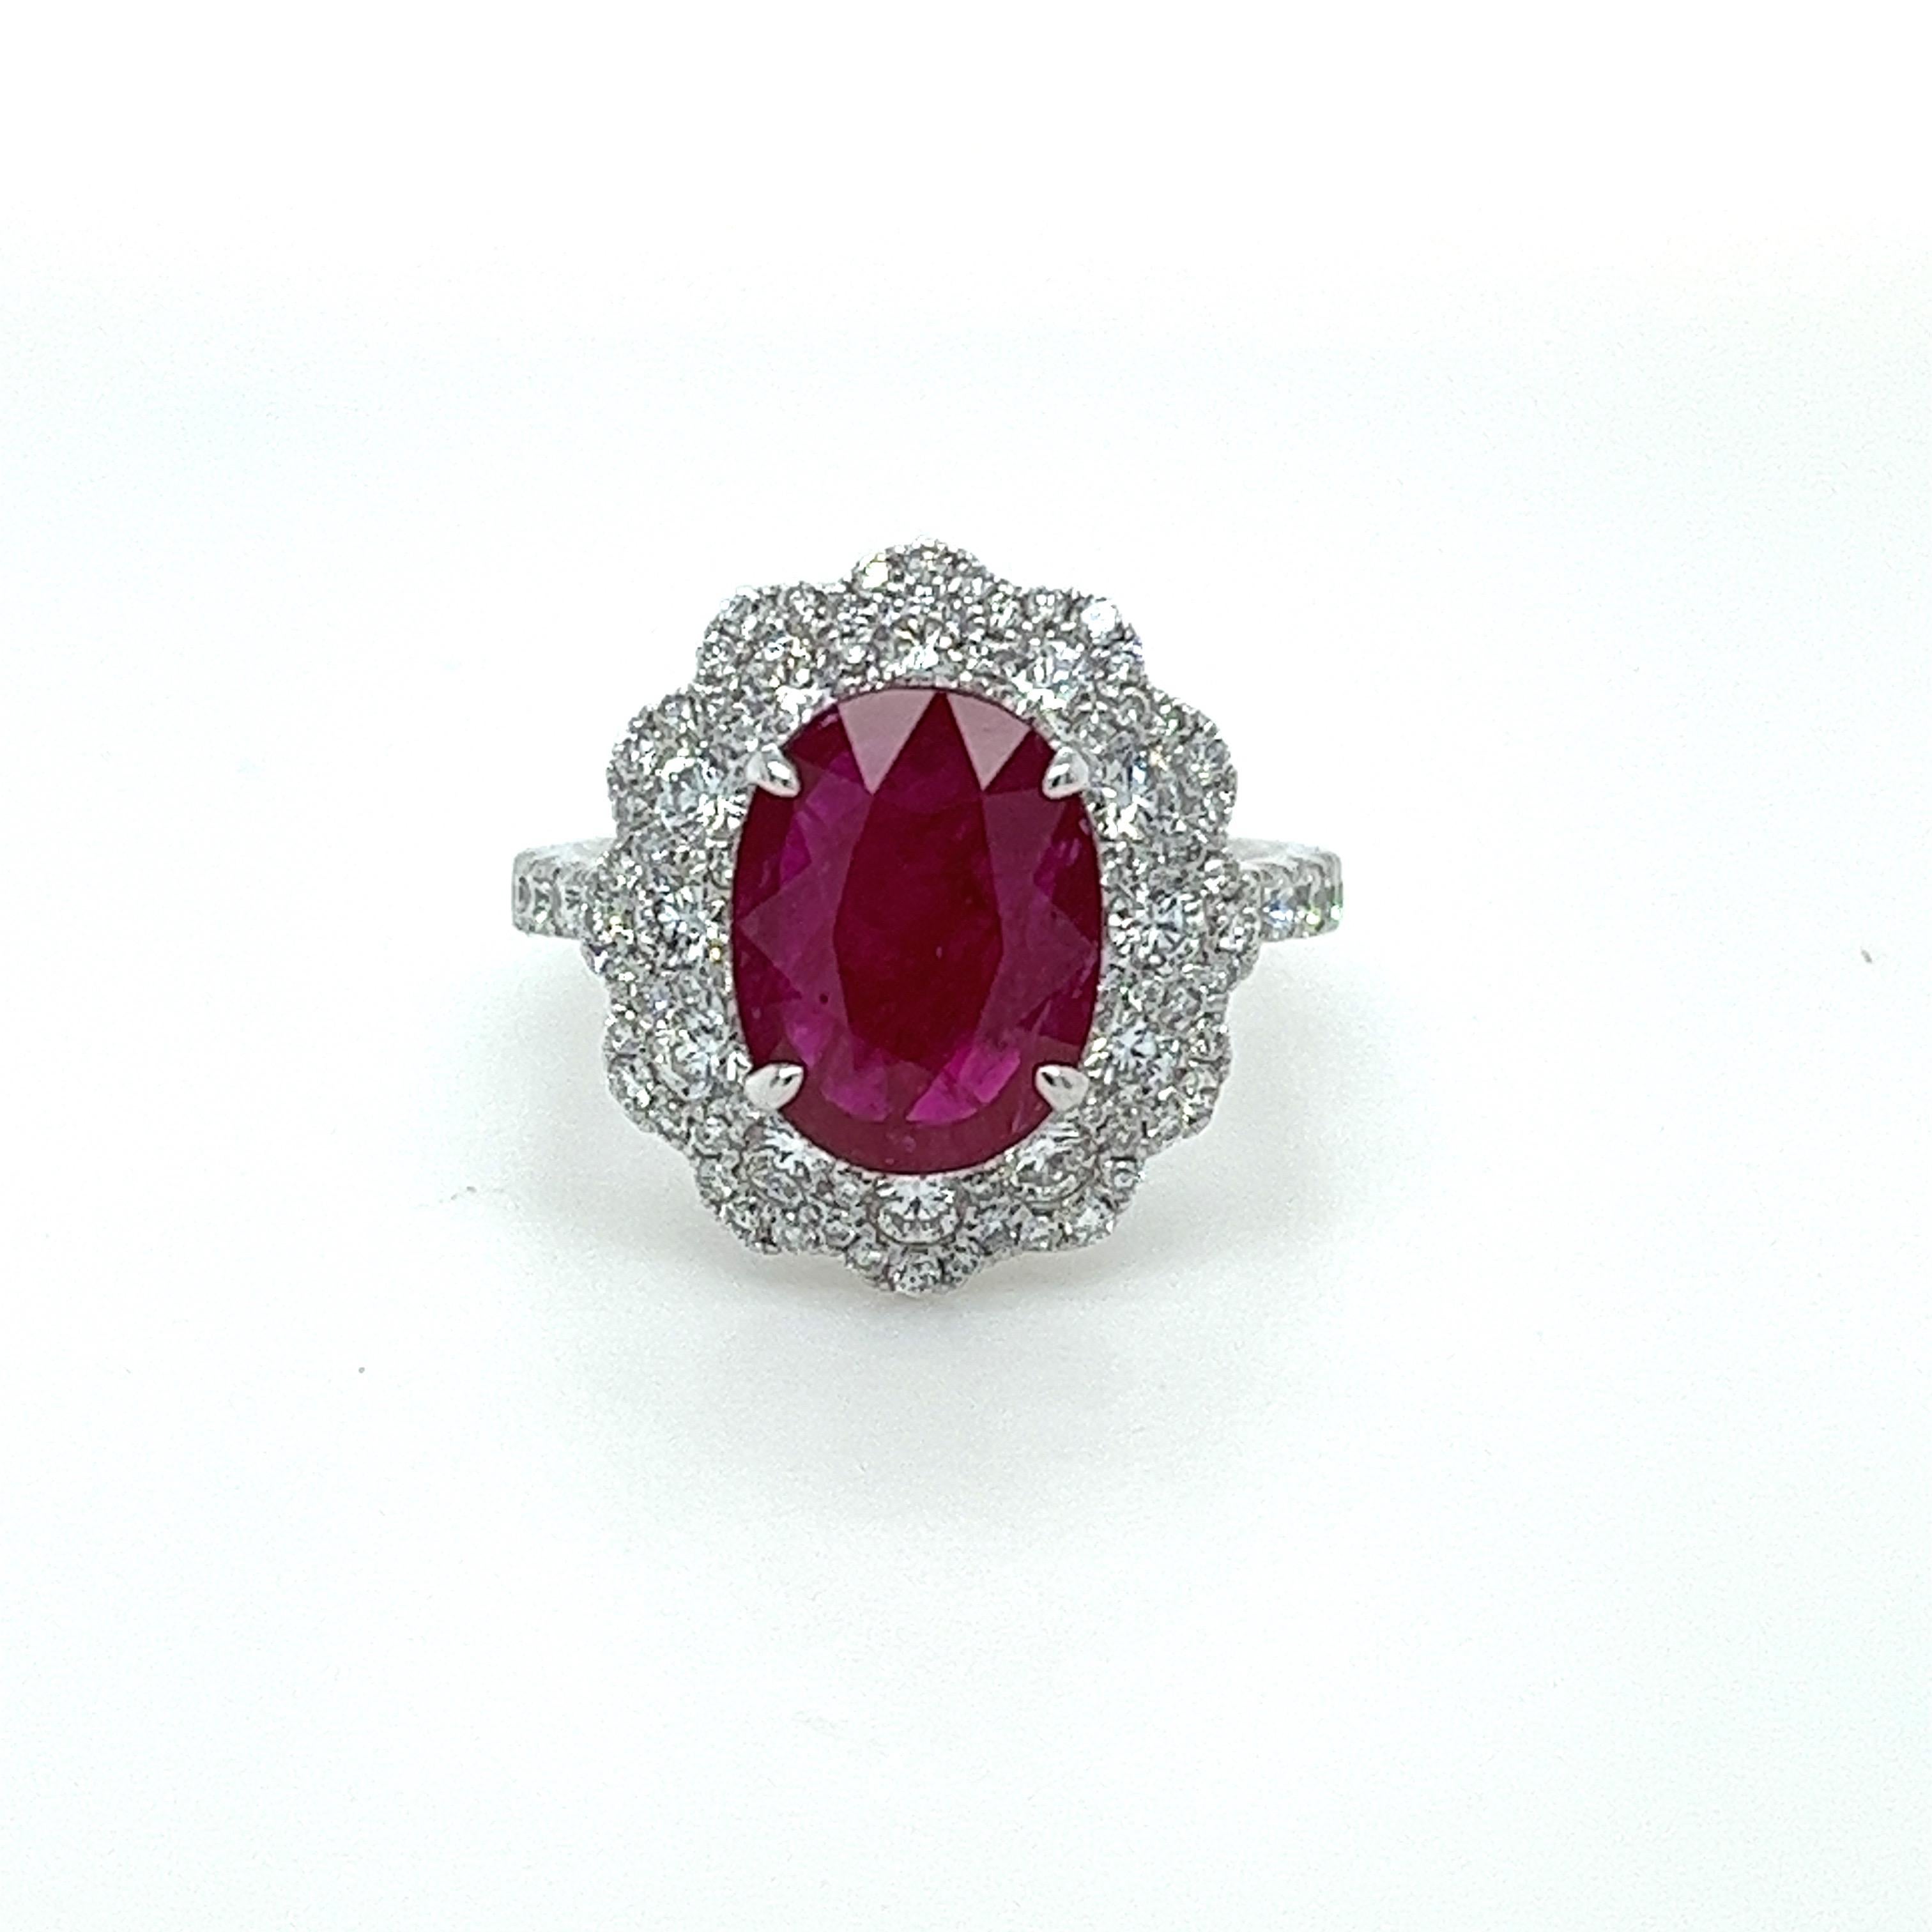 Oval Cut GIA Certified 2.81 Carat Oval Ruby & Diamond Ring in 18 Karat White Gold For Sale